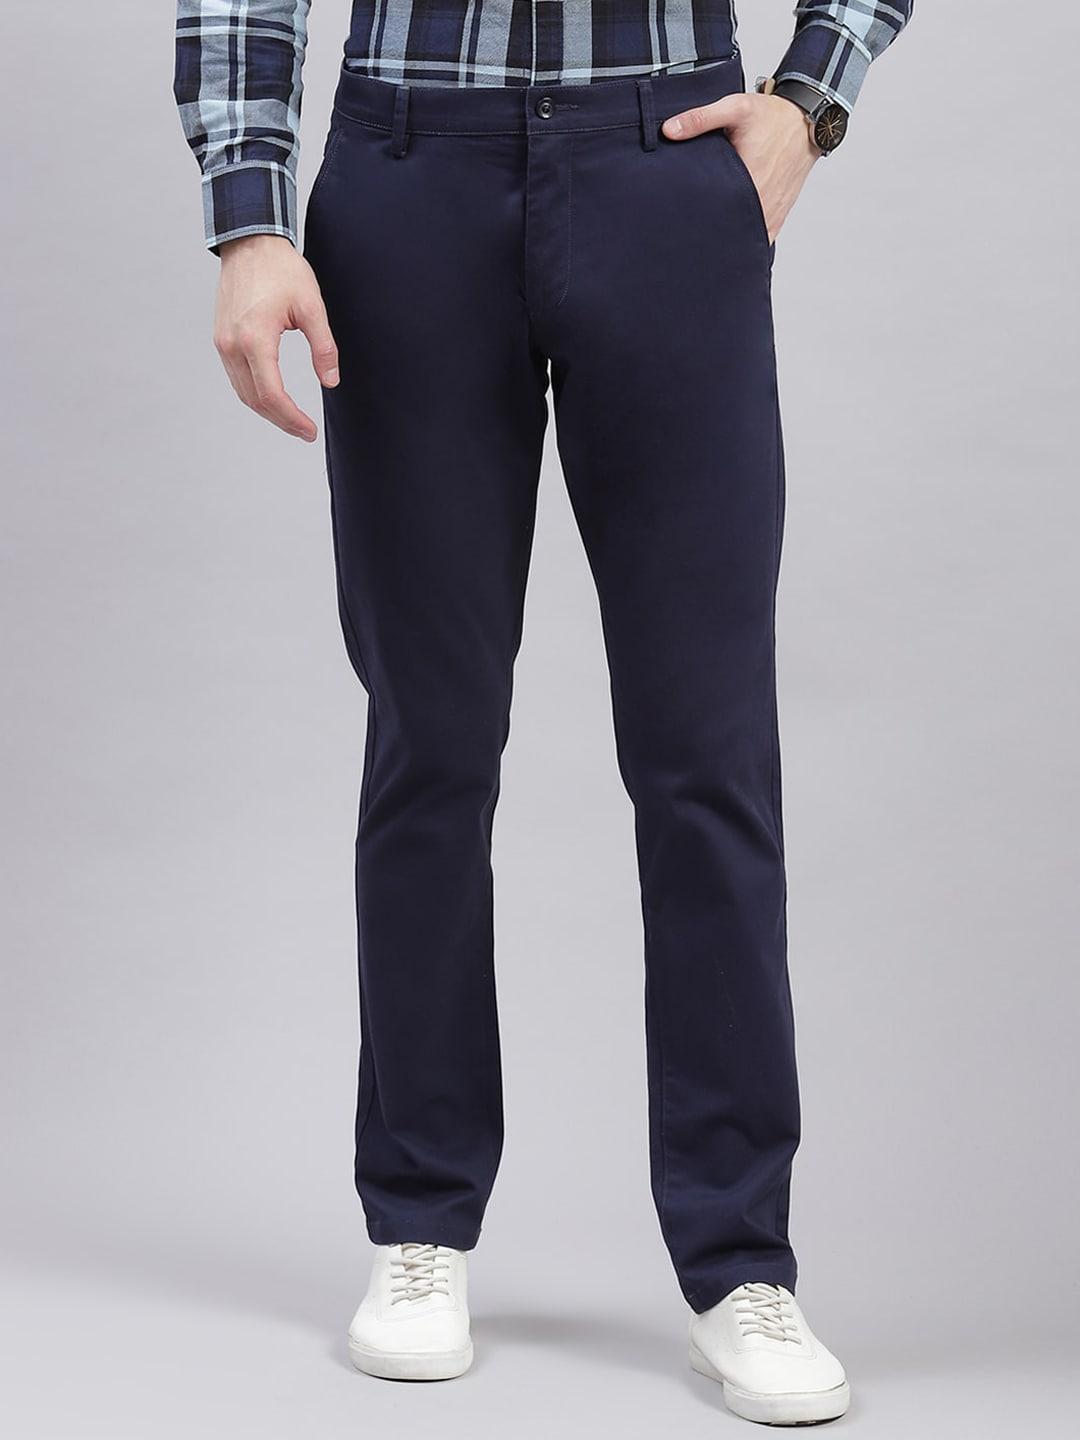 monte carlo men tapered fit chinos trousers